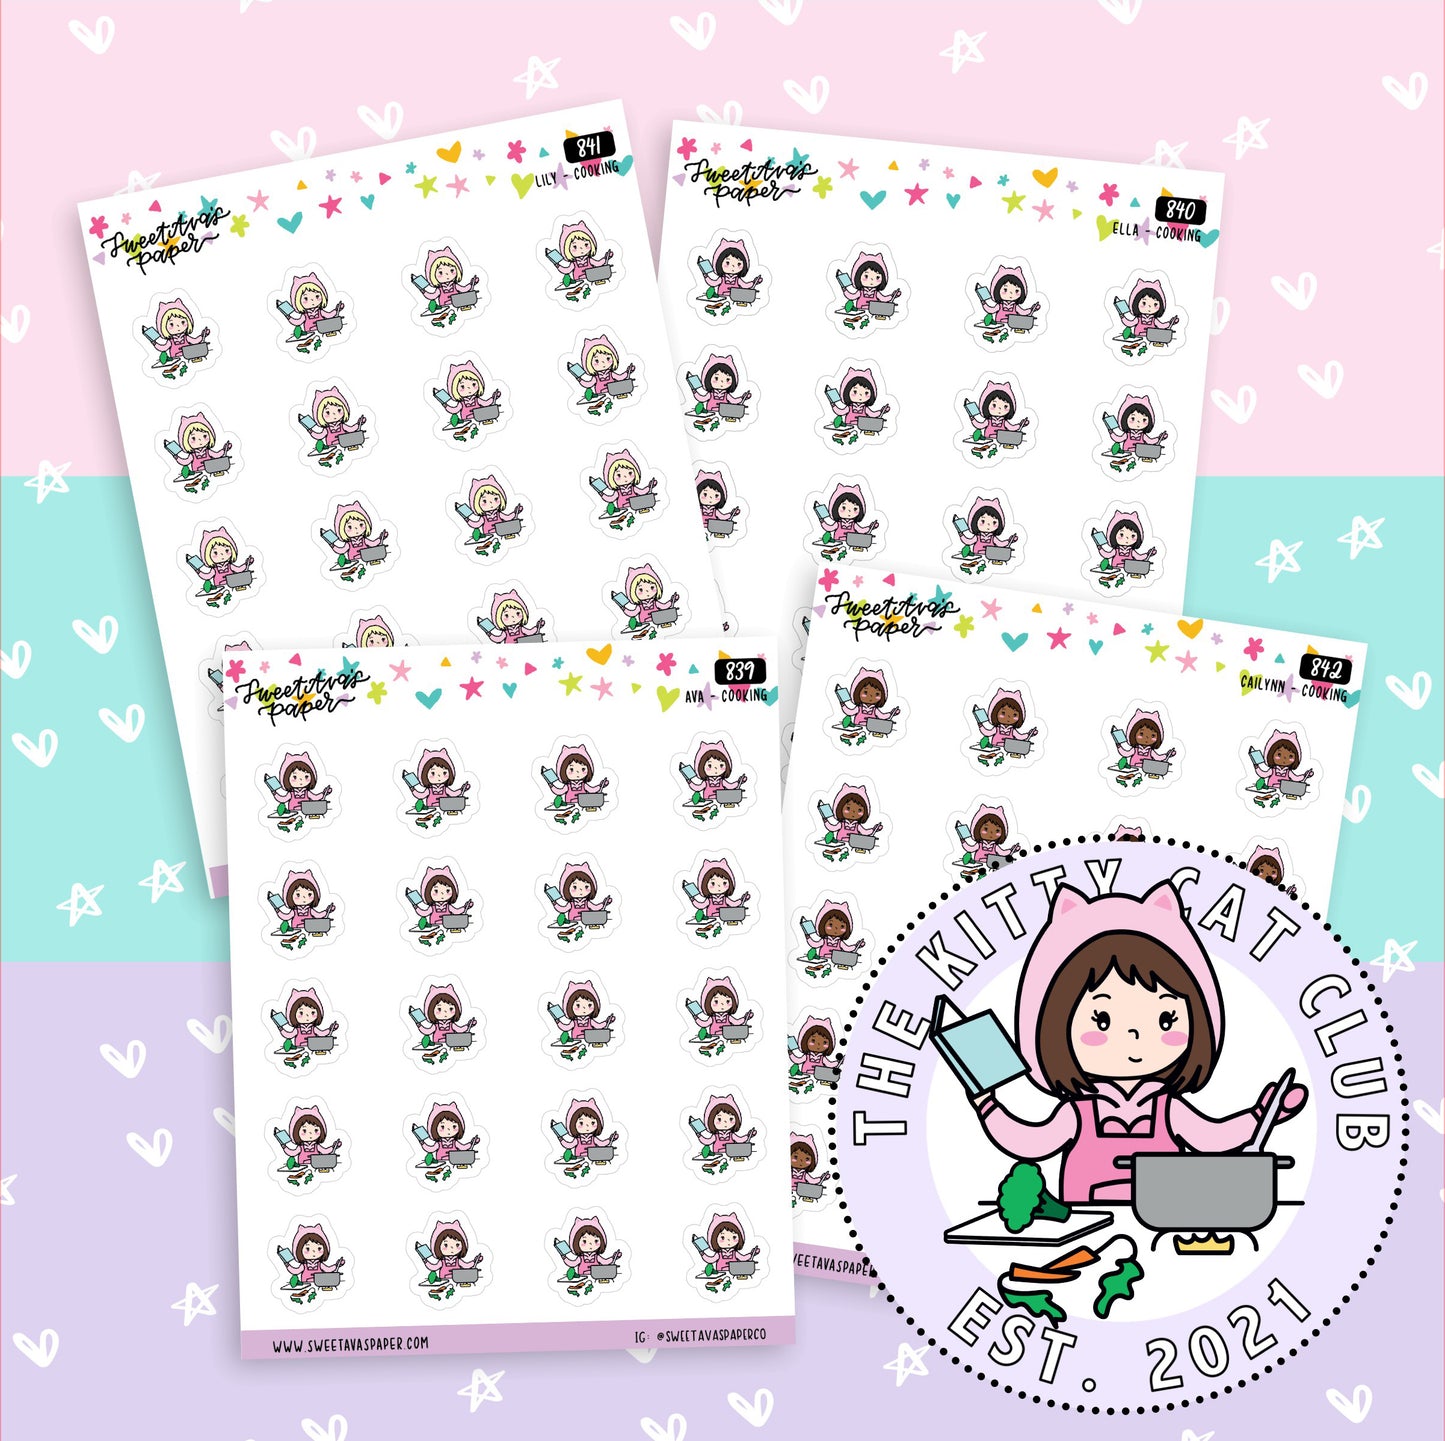 Cooking Planner Stickers - Meal Prep Planner Stickers - The Kitty Cat Club